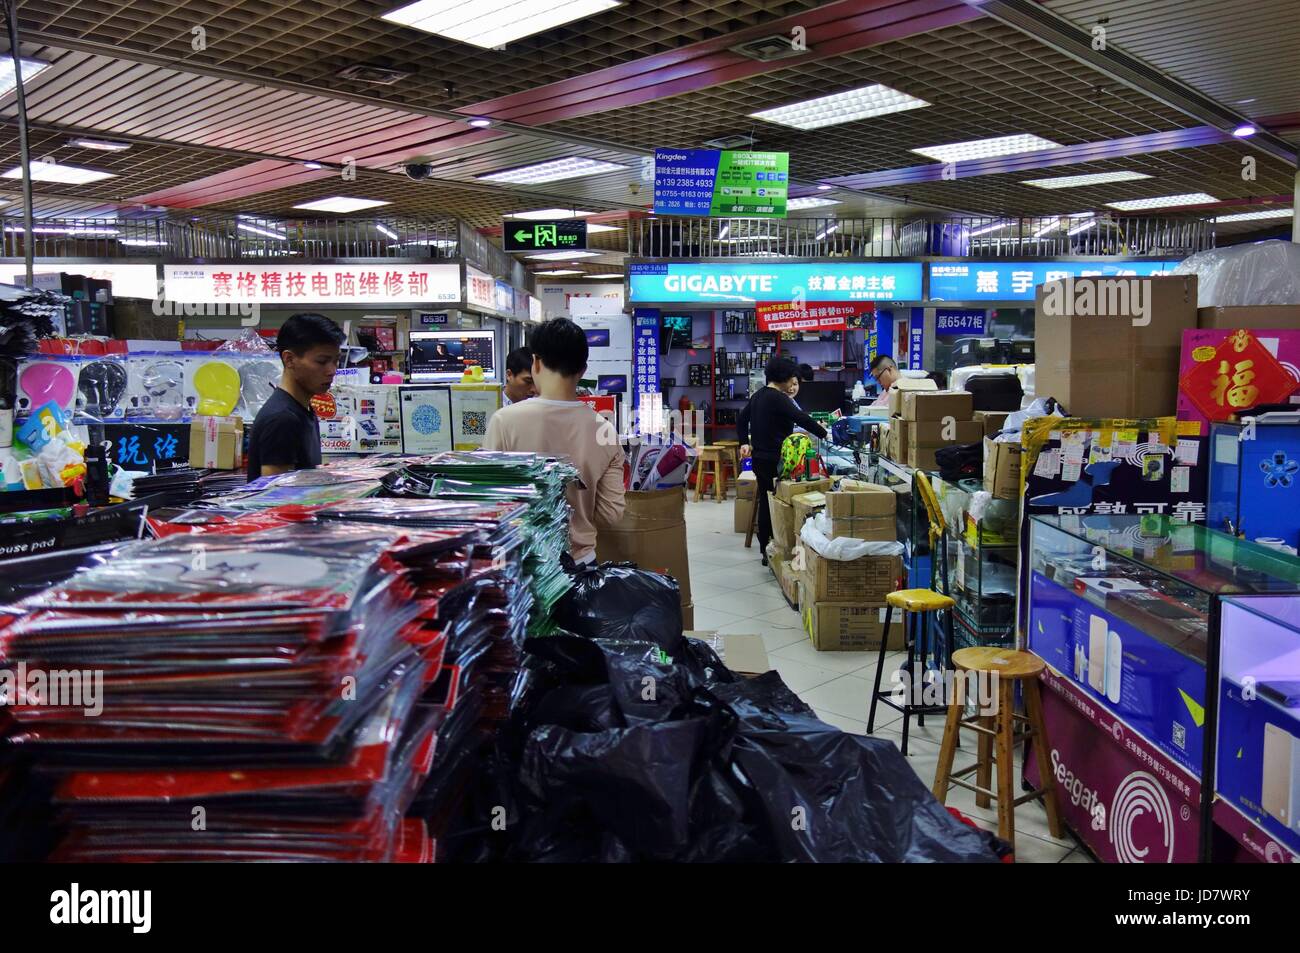 View of Huaqiangbei, the largest electronics market in the world, located in Shenzhen, People's Republic of China Stock Photo